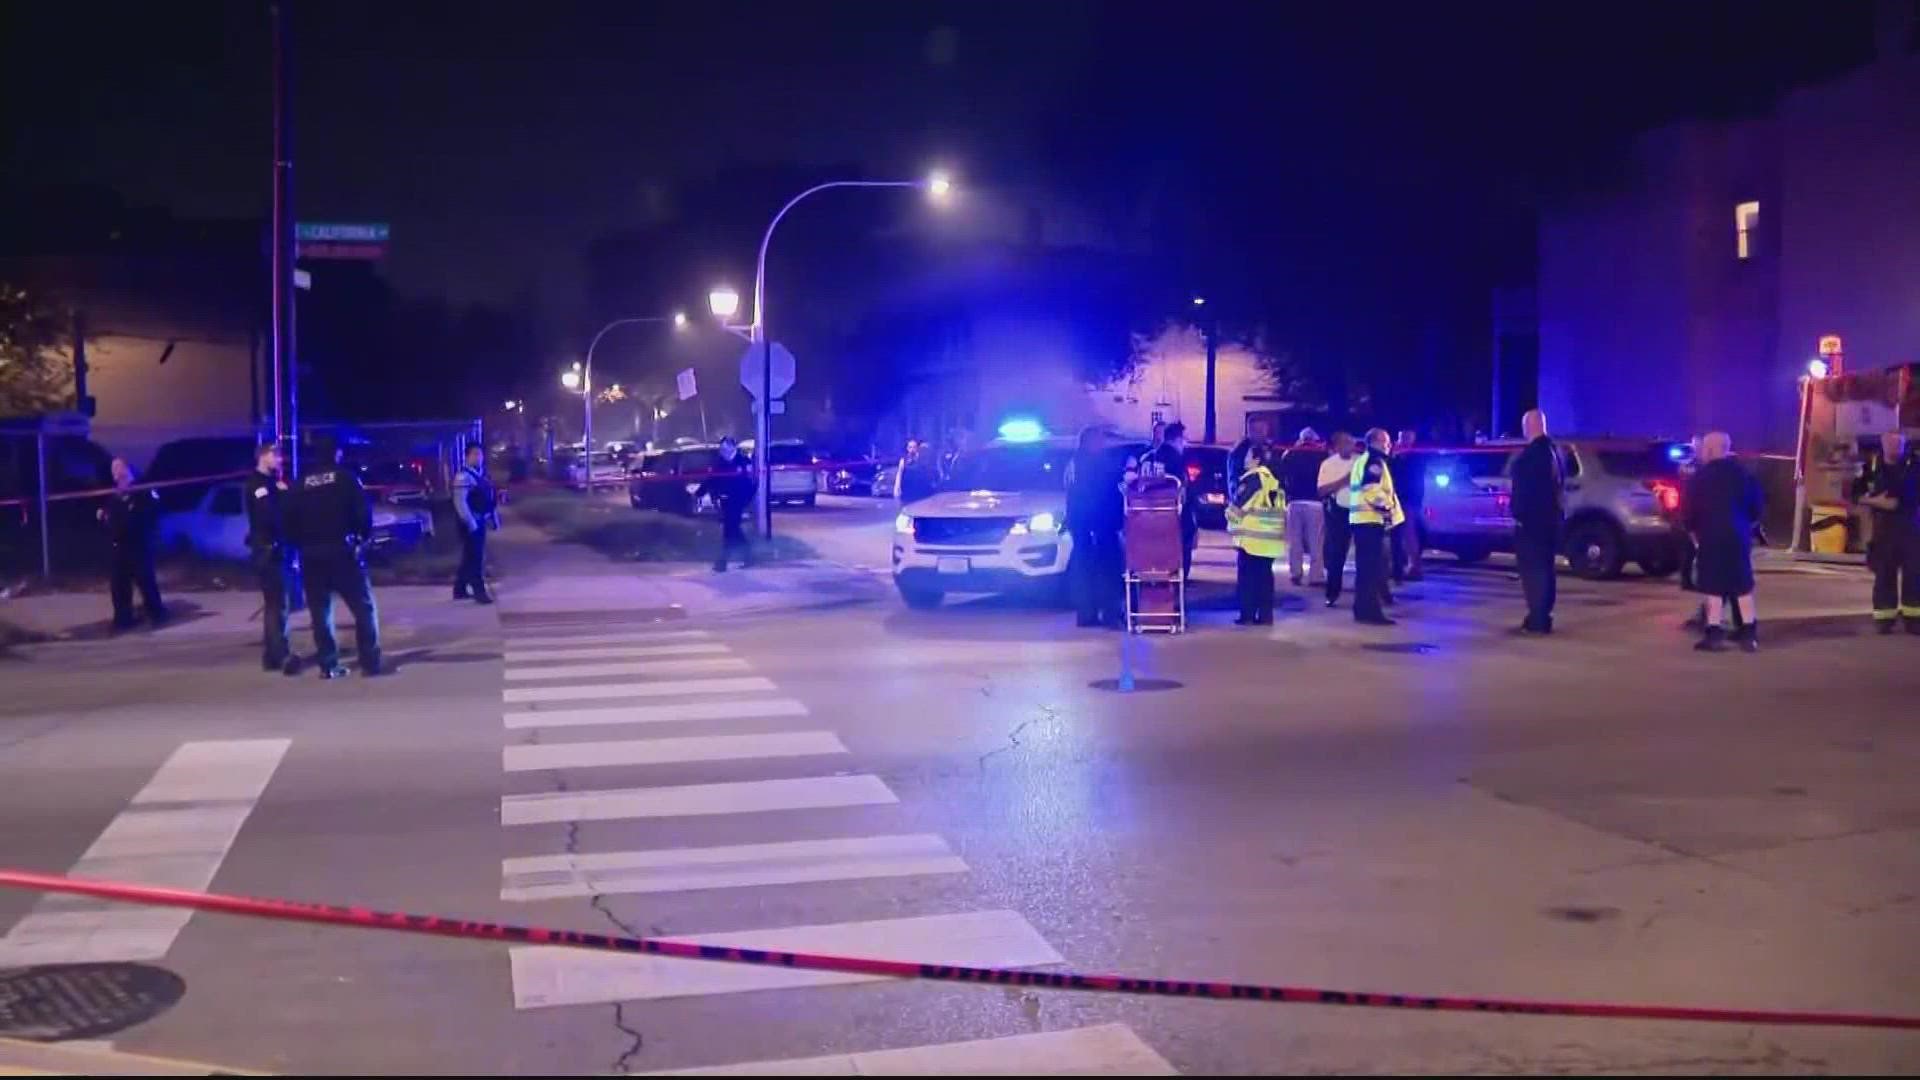 As many as 14 people were injured in a drive-by shooting, including three children, in the city’s Garfield Park neighborhood on Halloween night, Chicago police said.